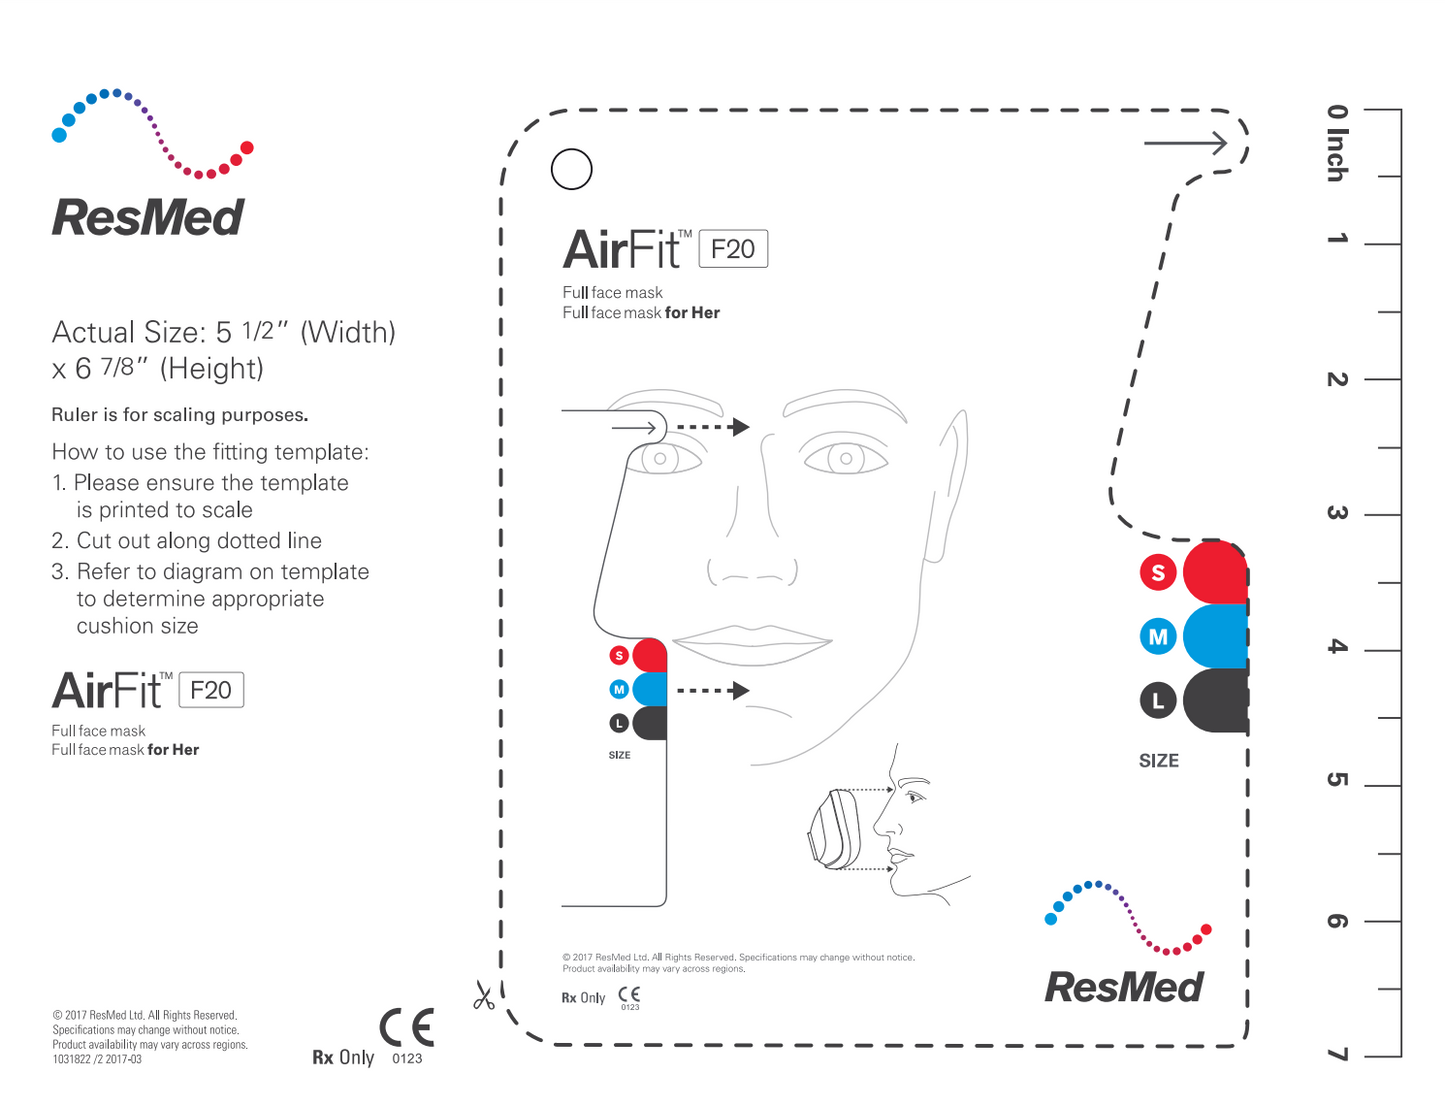 EssentialAir CPAP - Toronto Thornhill -ResMed AirFit F20 Mask Sizing Guide